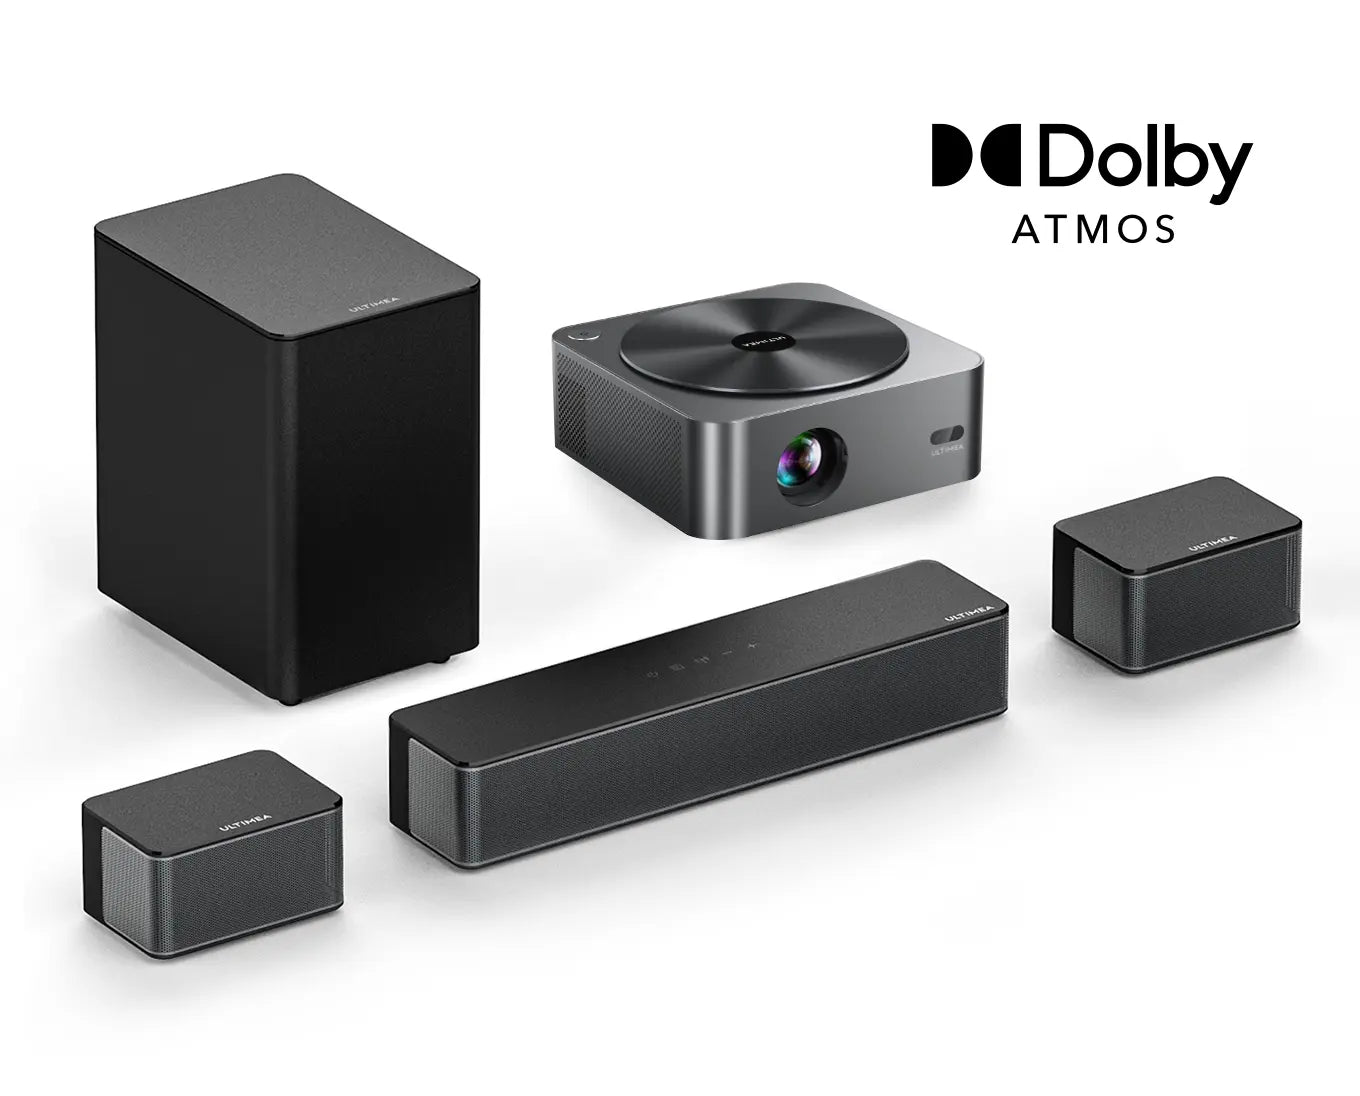 ULTIMEA Dolby Atmos Home Theater System